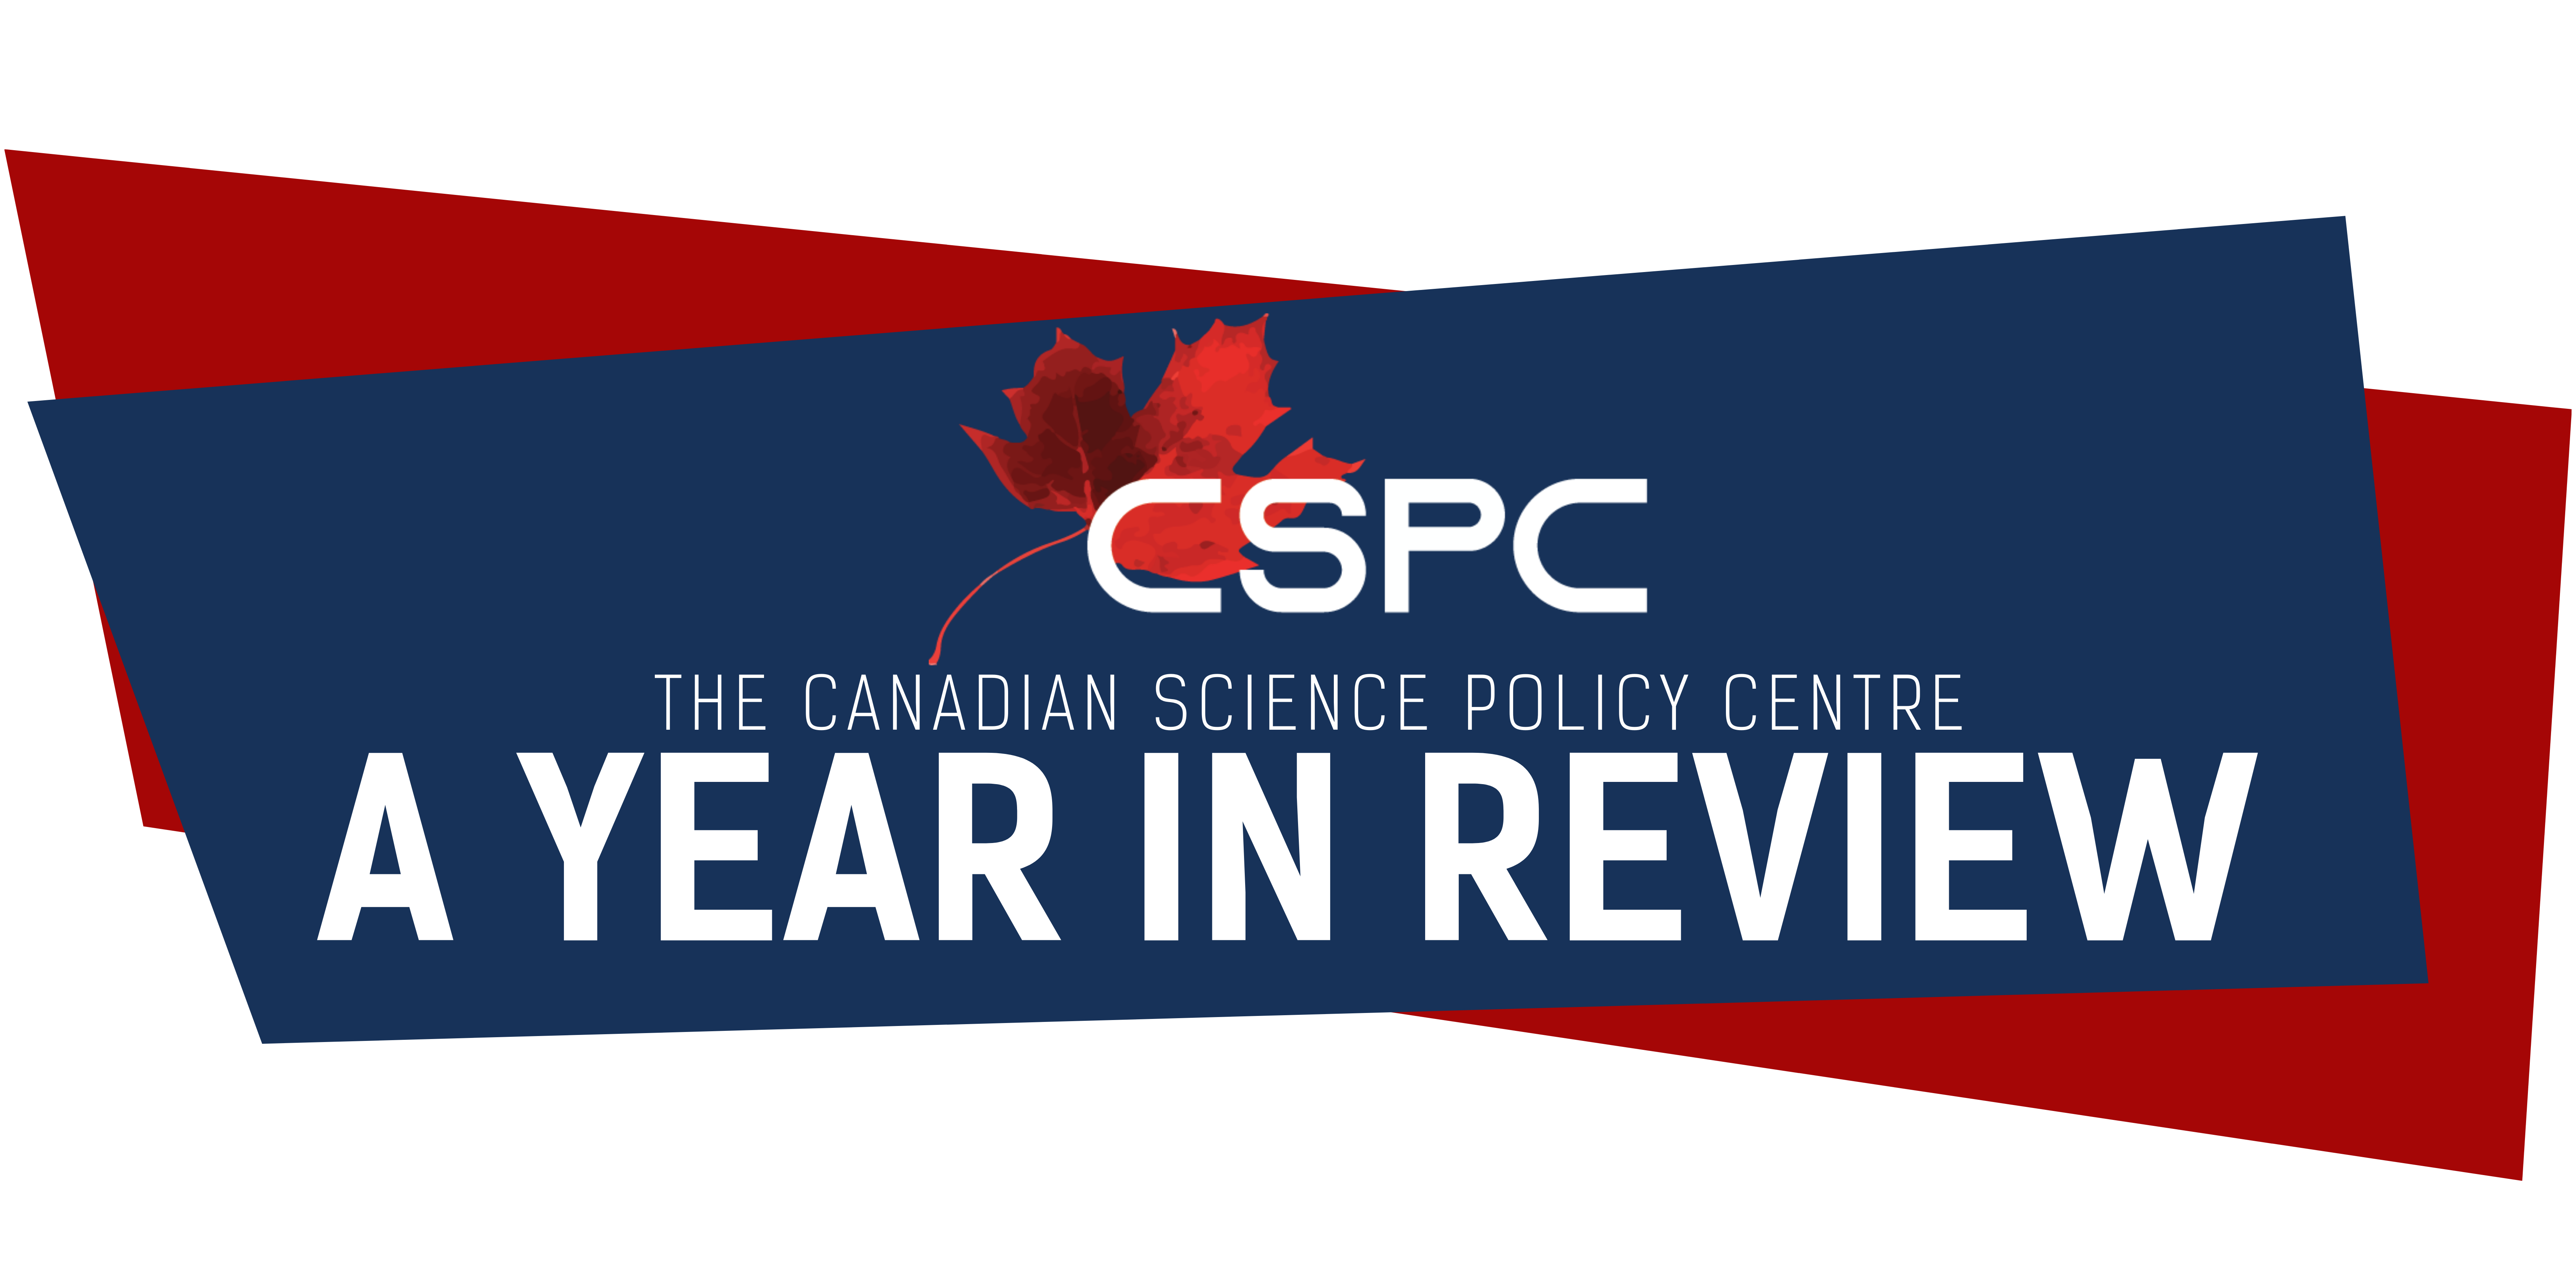 The Canadian Science Policy Center, a Year in Review